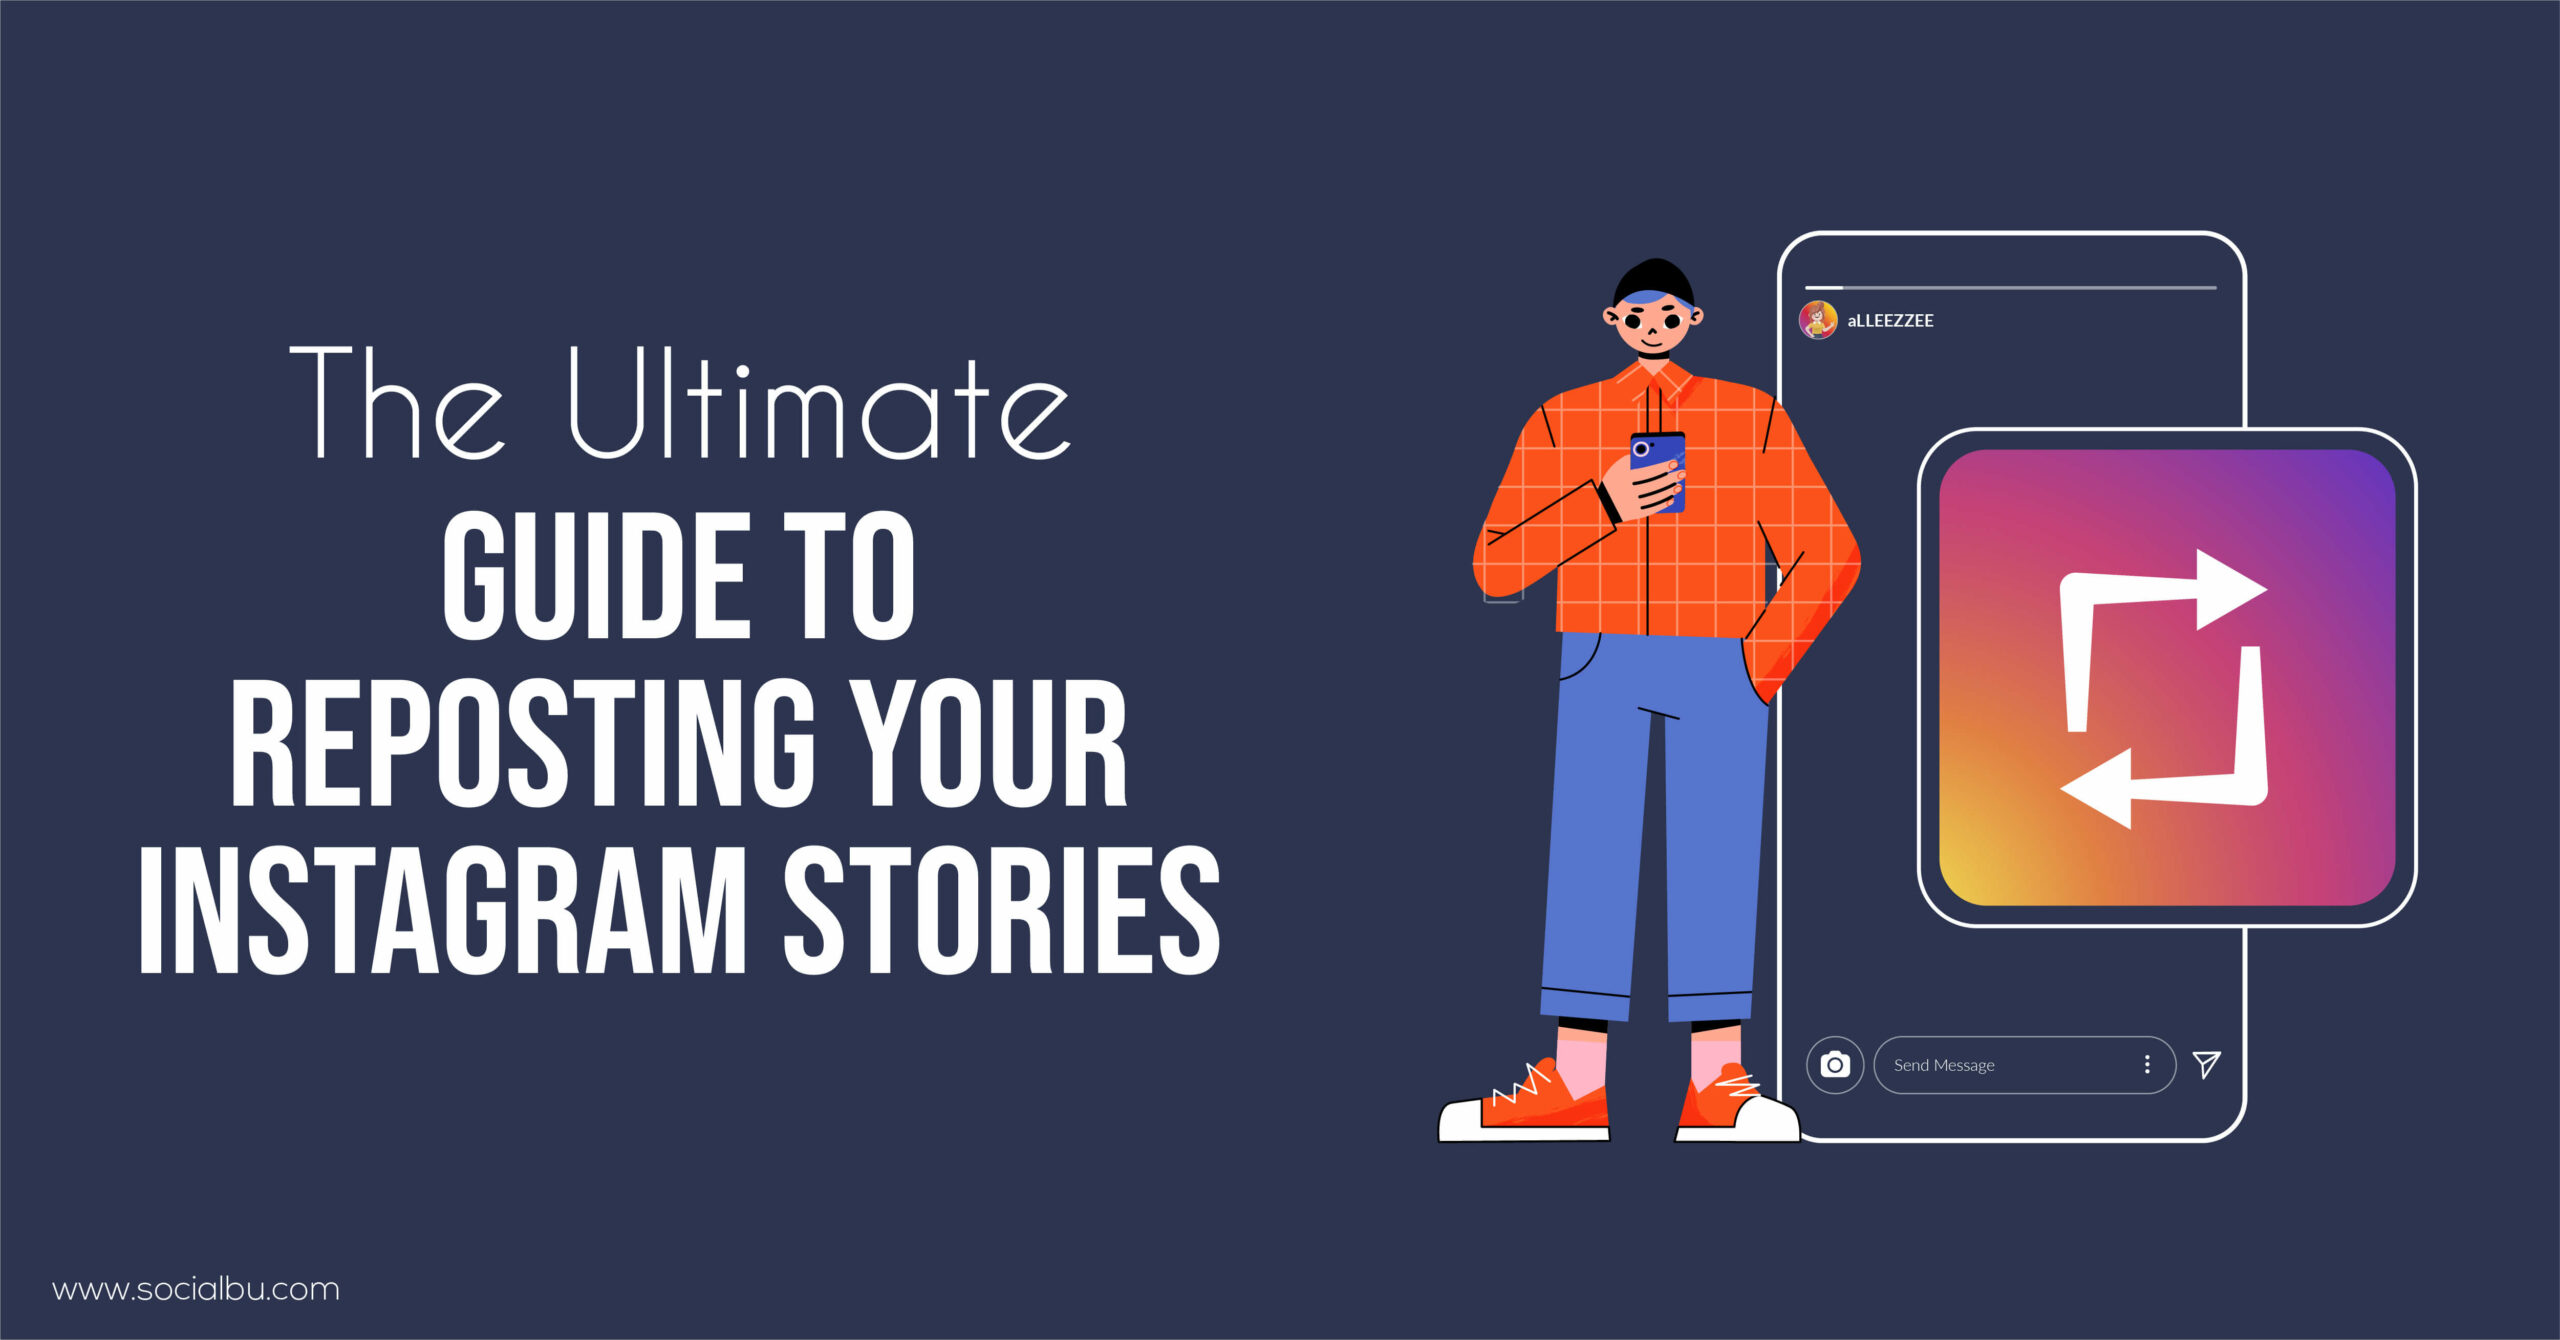 The Ultimate Guide to Reposting Your Instagram Stories